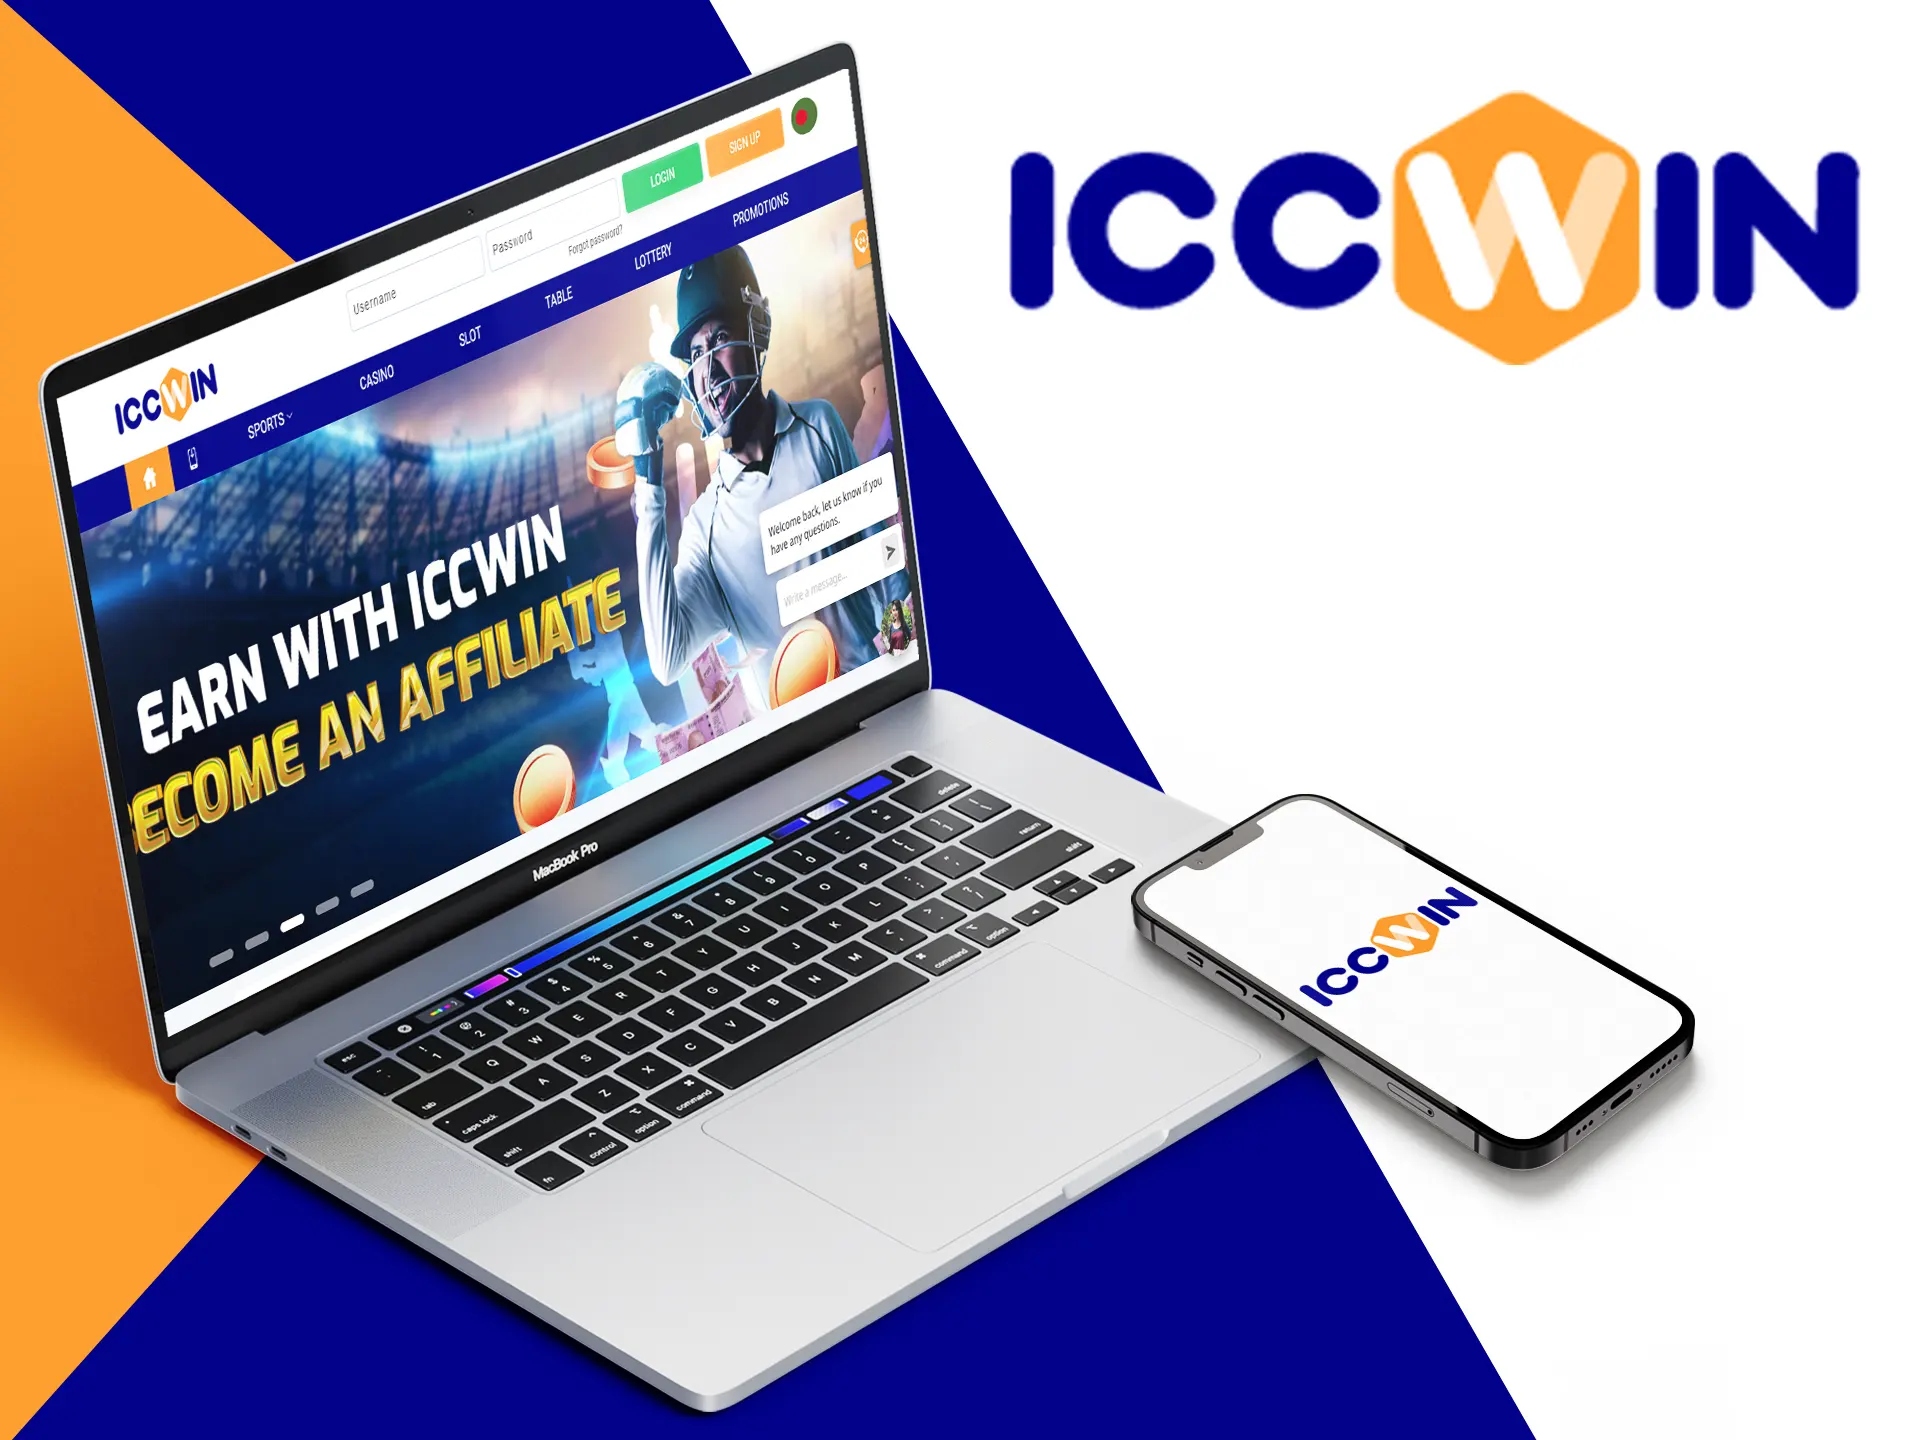 The ICCWIN website is a combination of technology and security, and is steadily gaining popularity in Bangladesh.